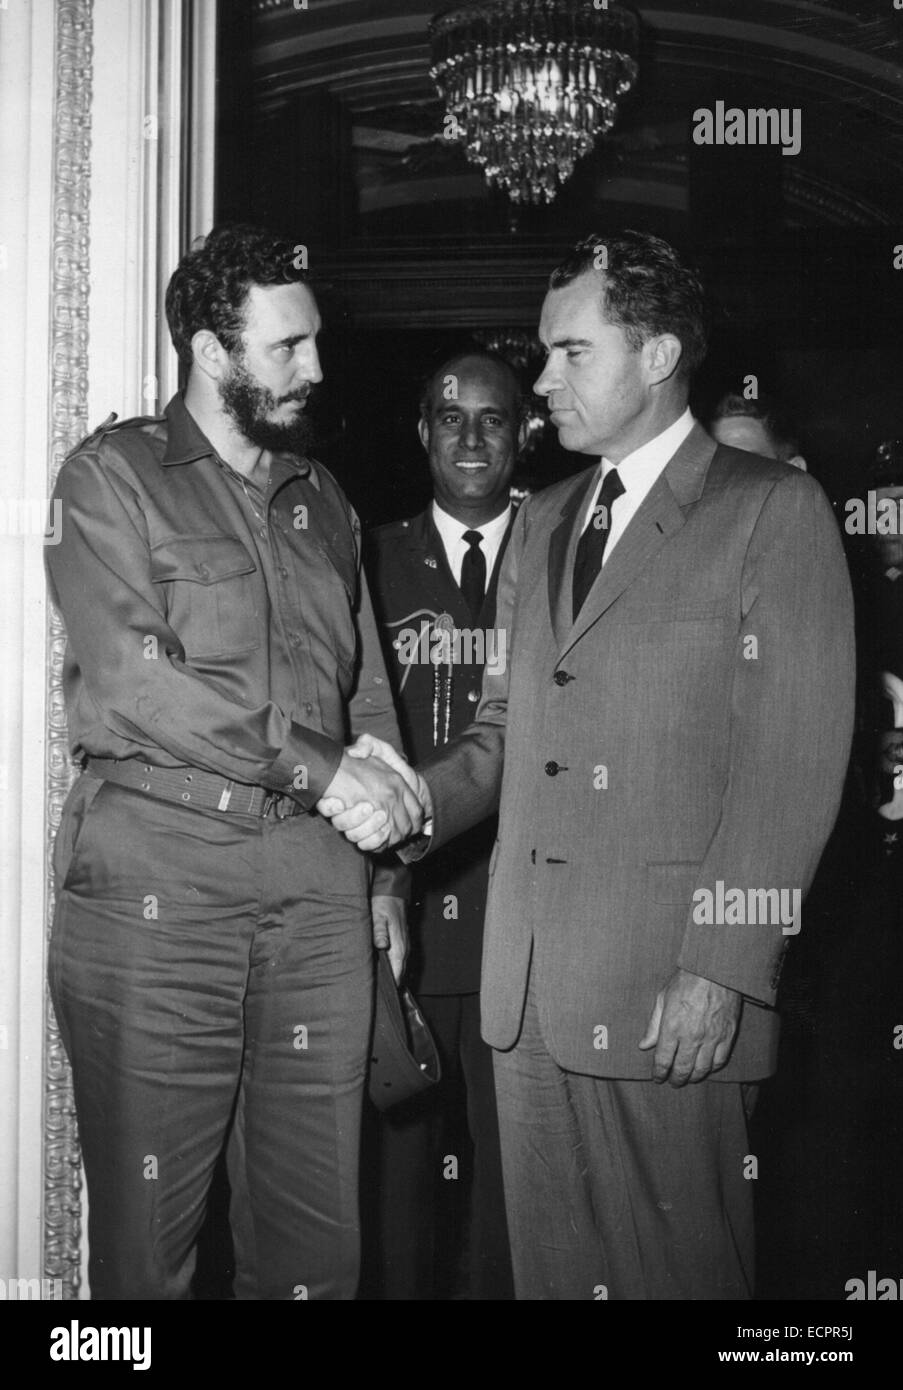 The US and Cuba announced an agreement between the two countries that will be a first step toward normalizing relations. PICTURED: Apr. 21, 1959 - Washington, DC, USA - Cuban revolutionary leader who led his country from 1959 until 2008, FIDEL CASTRO transformed Cuba into the first communist state in the Western Hemisphere. Although the US has tried hard to get rid of him, President Castro outlasted no fewer than nine American presidents since he took power in 1959. PICTURED: Castro shaking hands with RICHARD NIXON. © KEYSTONE Pictures USA/ZUMAPRESS.com/Alamy Live News Stock Photo